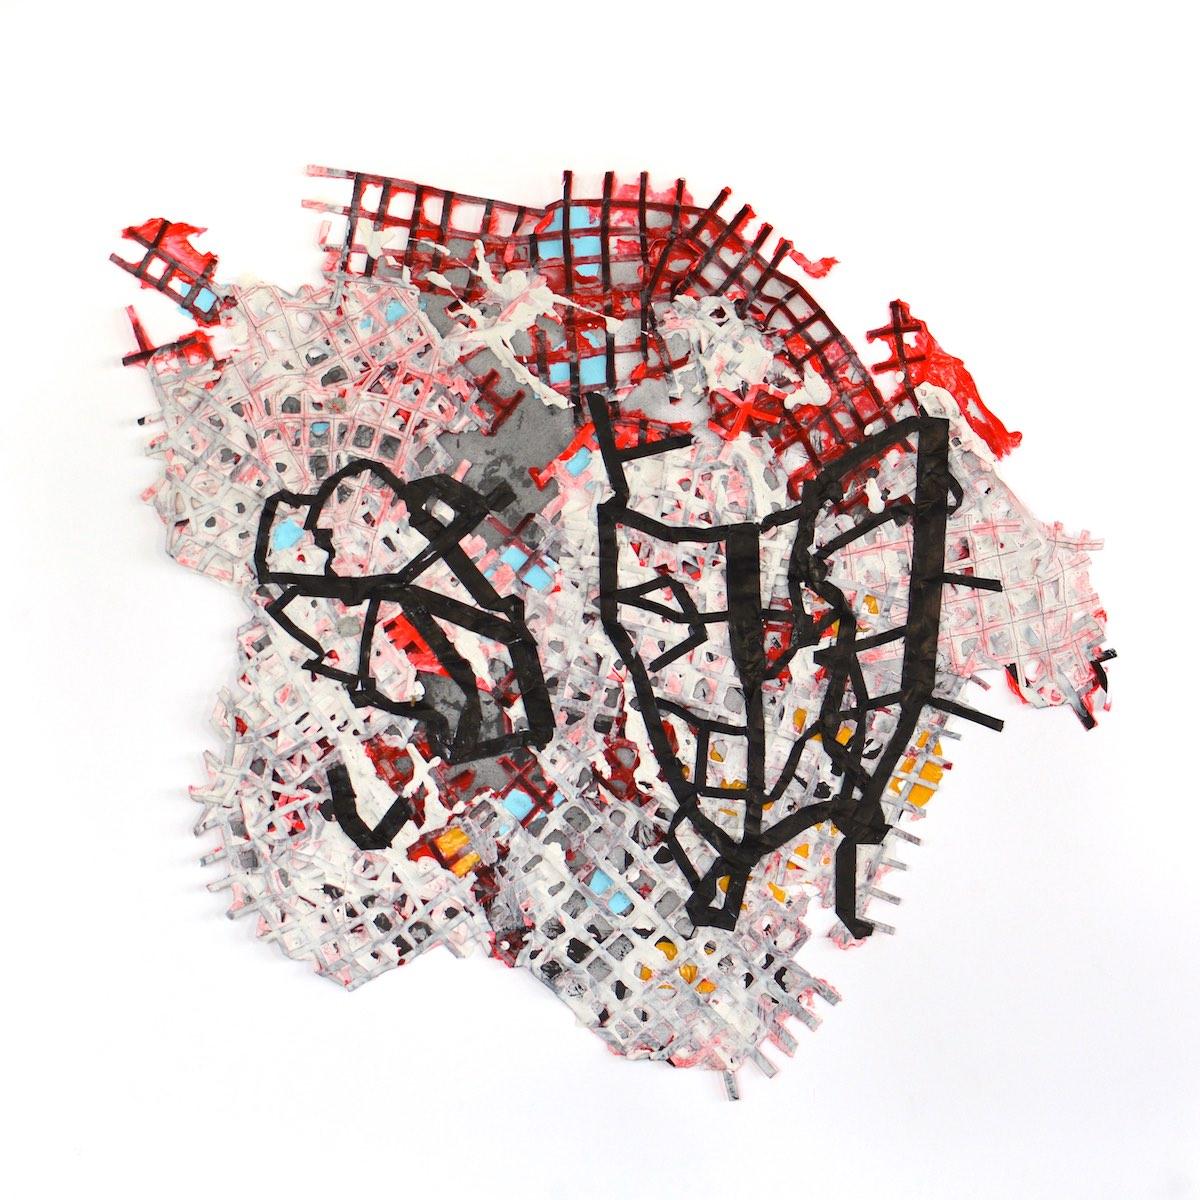 Cut Out (Series) 184SM, 2022, Paint, ink and cut out paper, (unframed), 55 × 55 × 2 cm, by Alan Franklin

This is one of Alan’s sculptural drawings using cut out paper layers.  Alan is interested in the ideas of repetition and variation and sets up